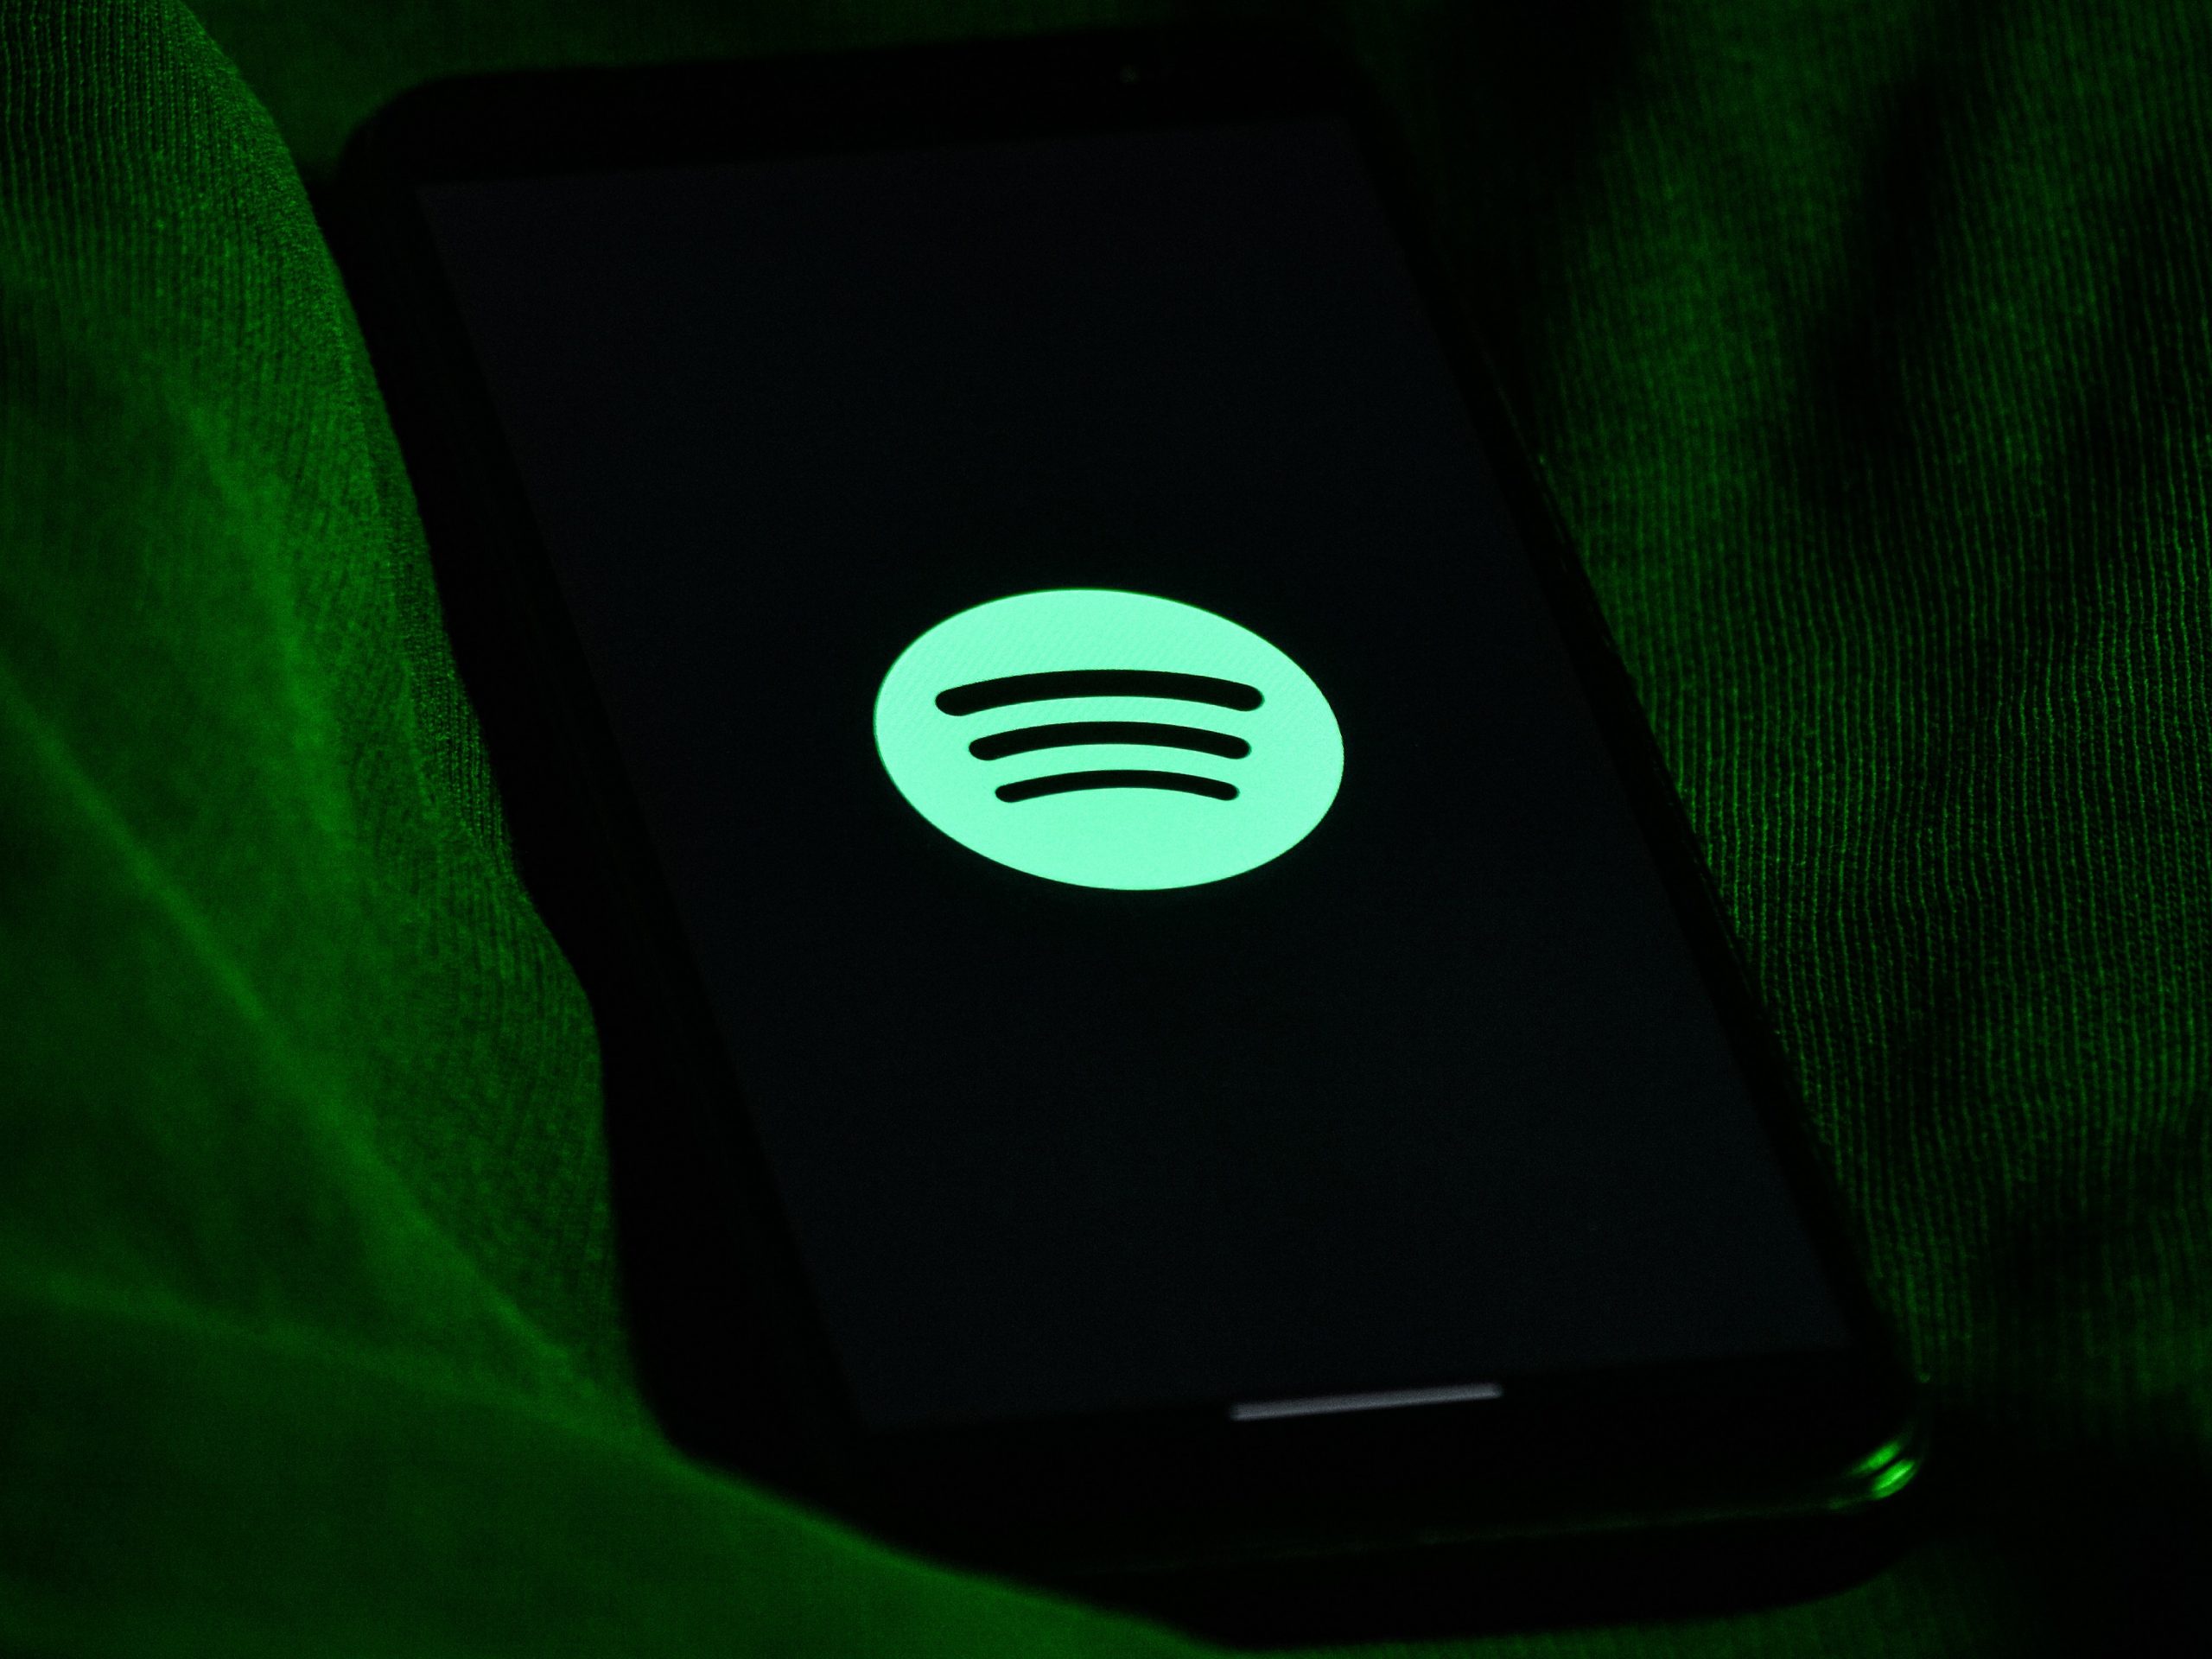 Podcasts are leading to Spotify Free growing faster than Premium